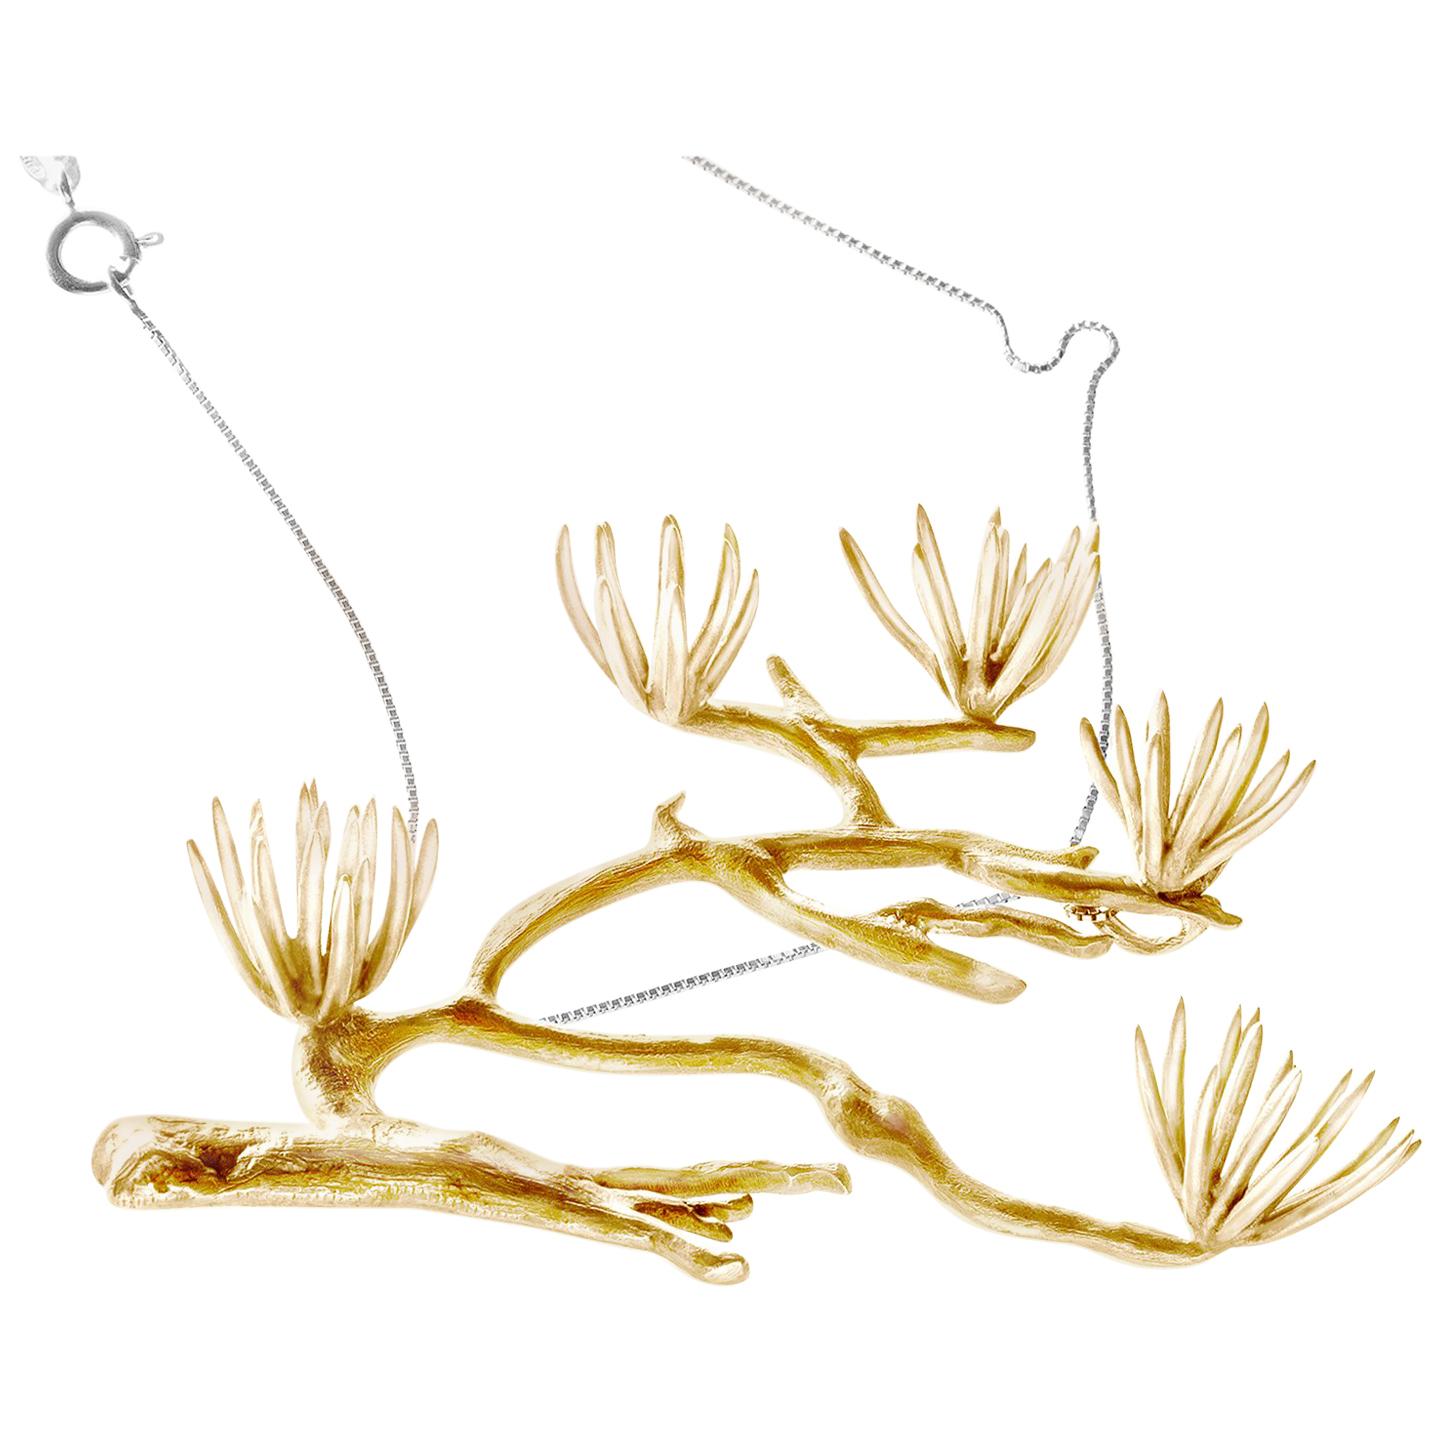 This yellow gold-plated sterling silver Pine necklace was featured in Vogue UA and Another magazine UK. The inspiration behind the pine collection derives from Japanese and Chinese ink painting, where pine silhouettes are elegantly depicted.